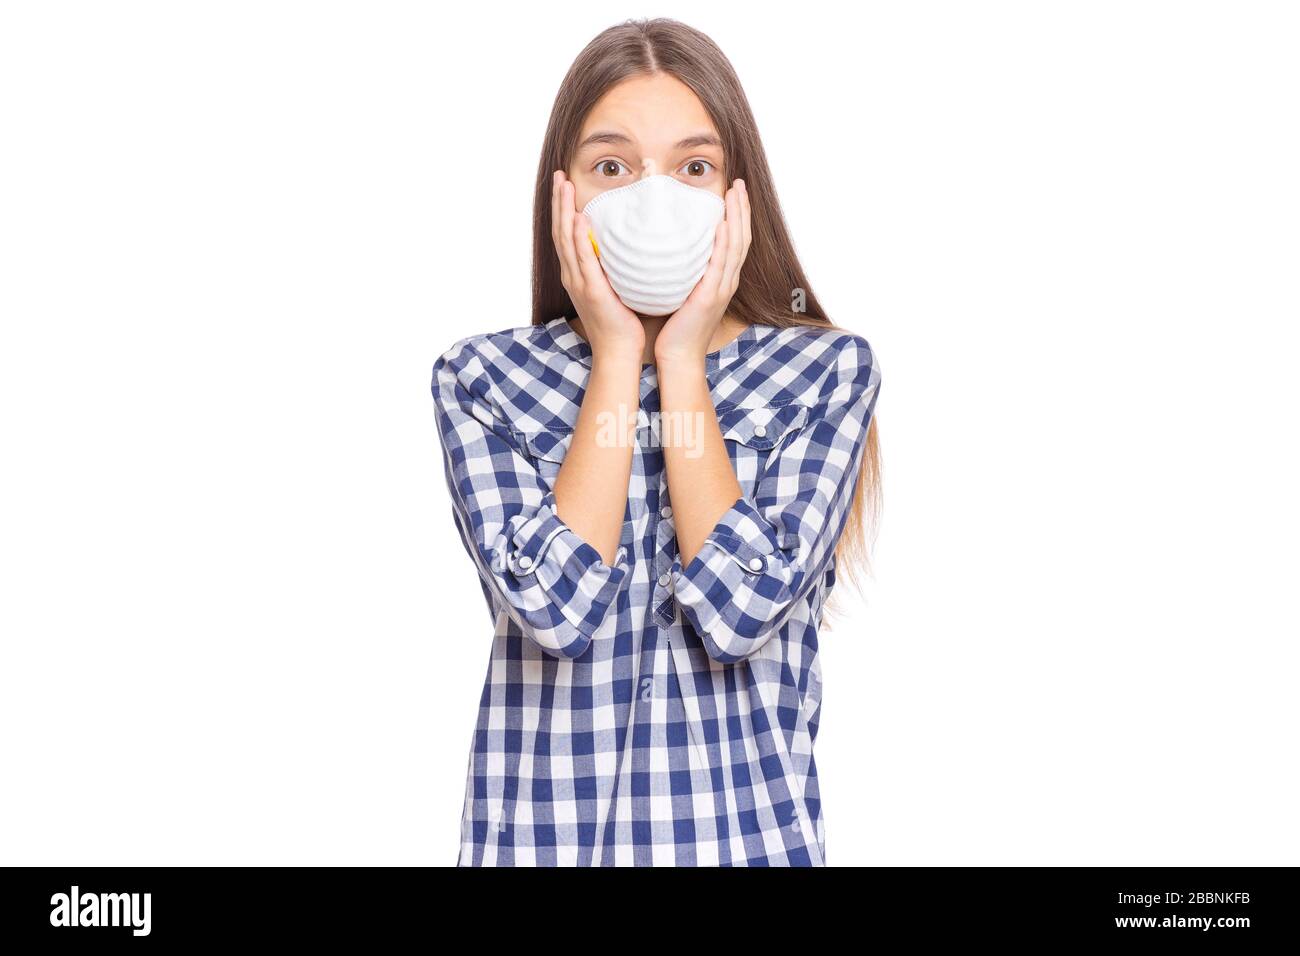 Teen girl in protective face mask Stock Photo